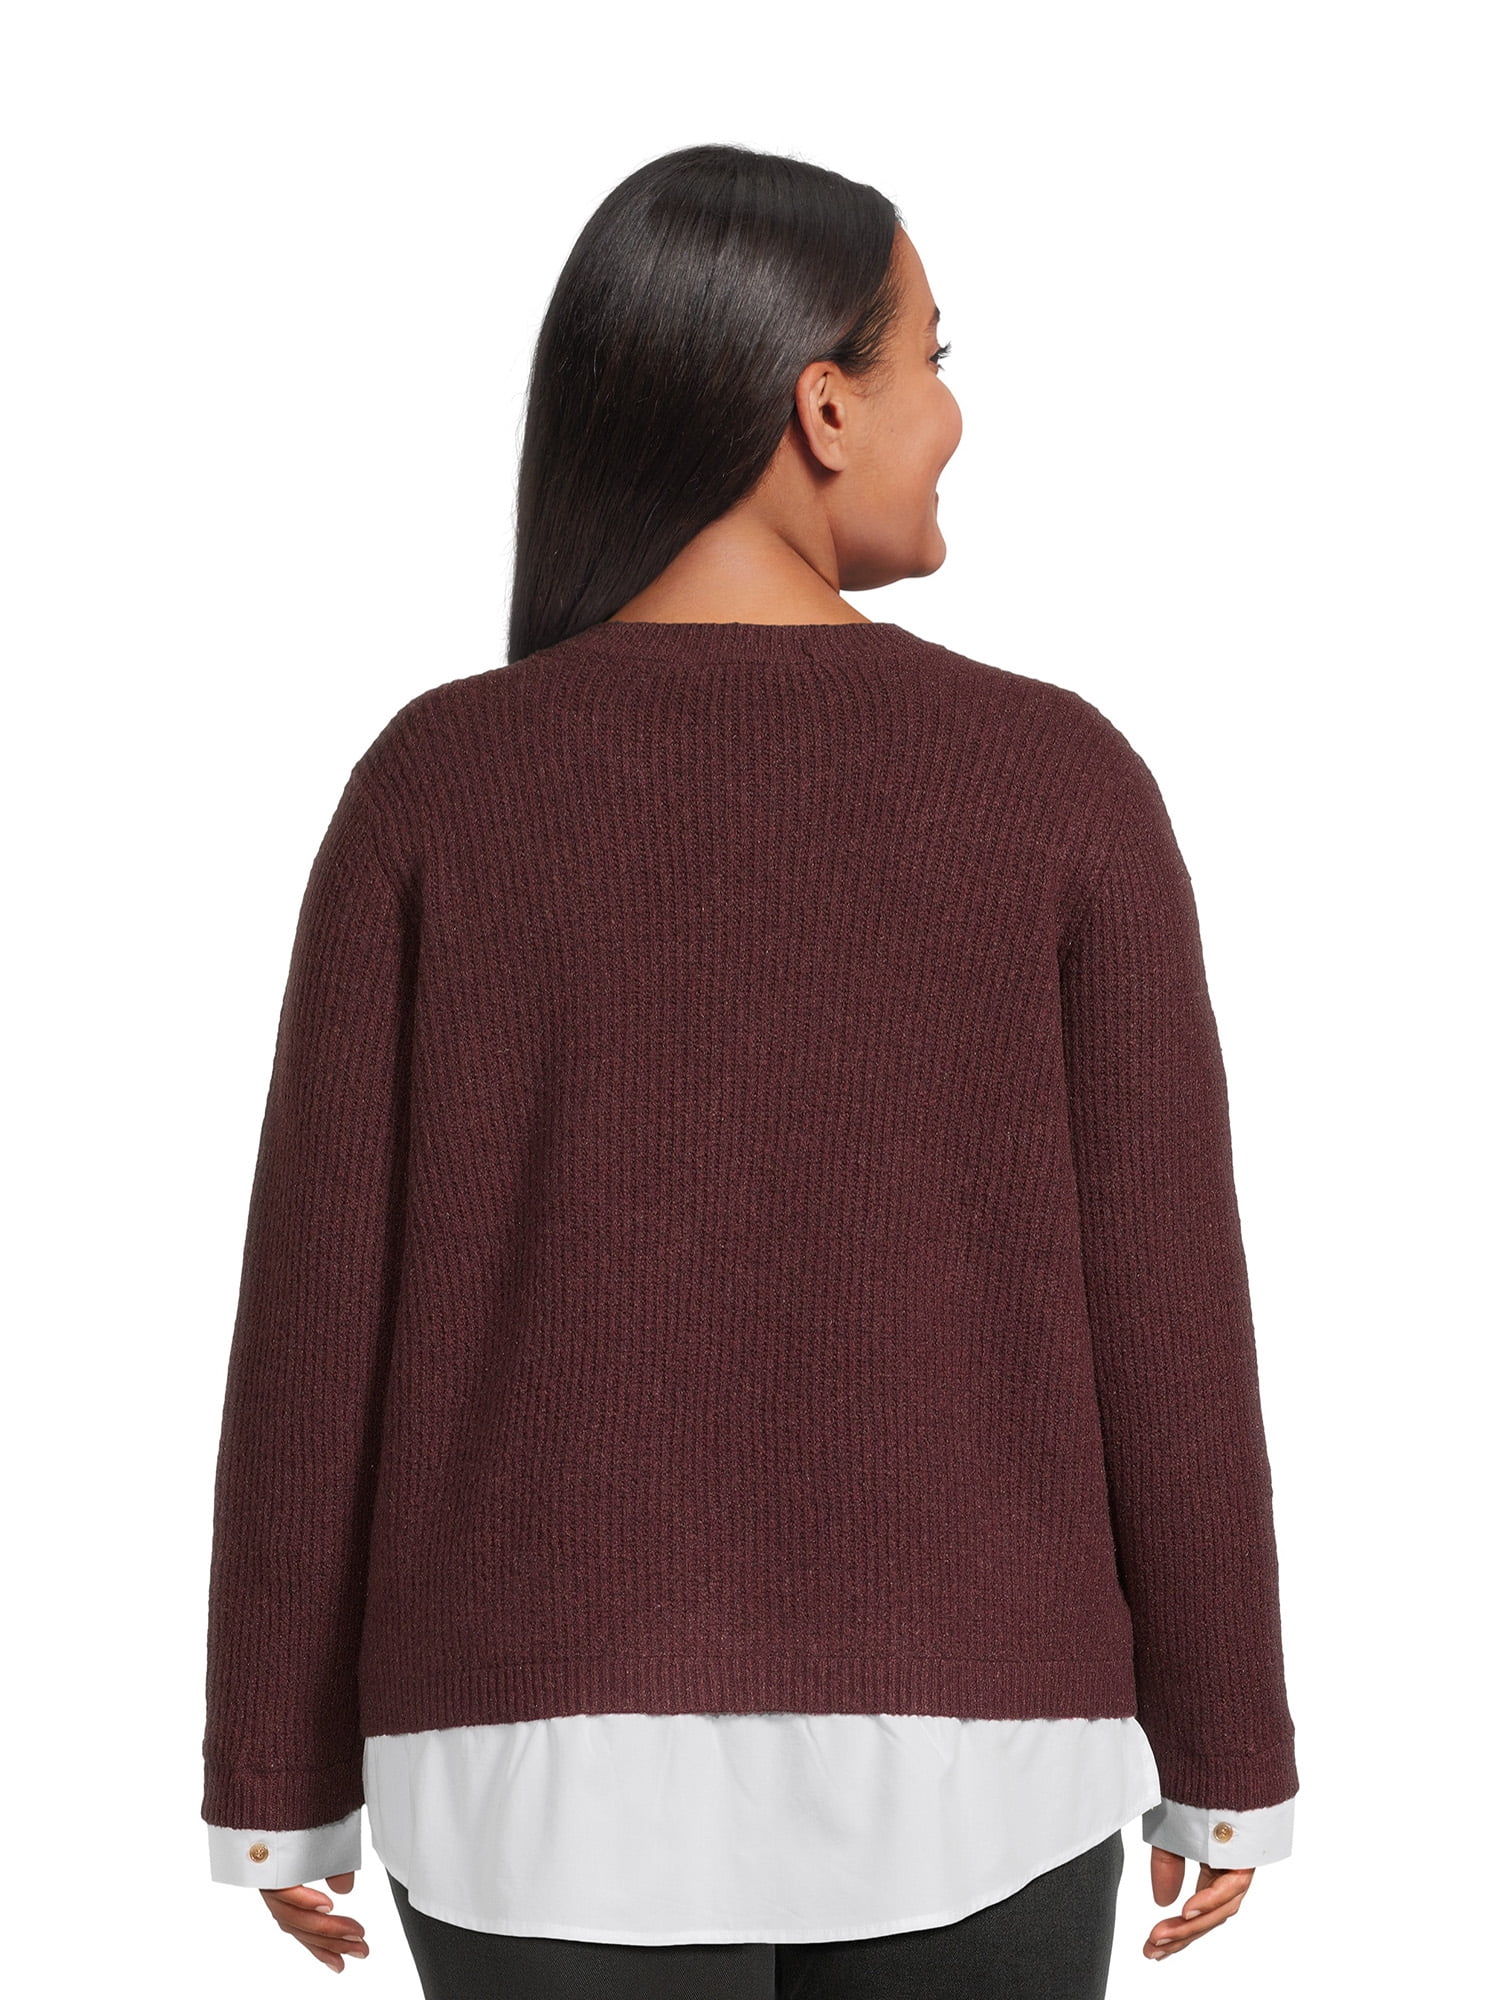 Terra & Sky Women's Plus Size Layered Look Cable Knit Sweater 